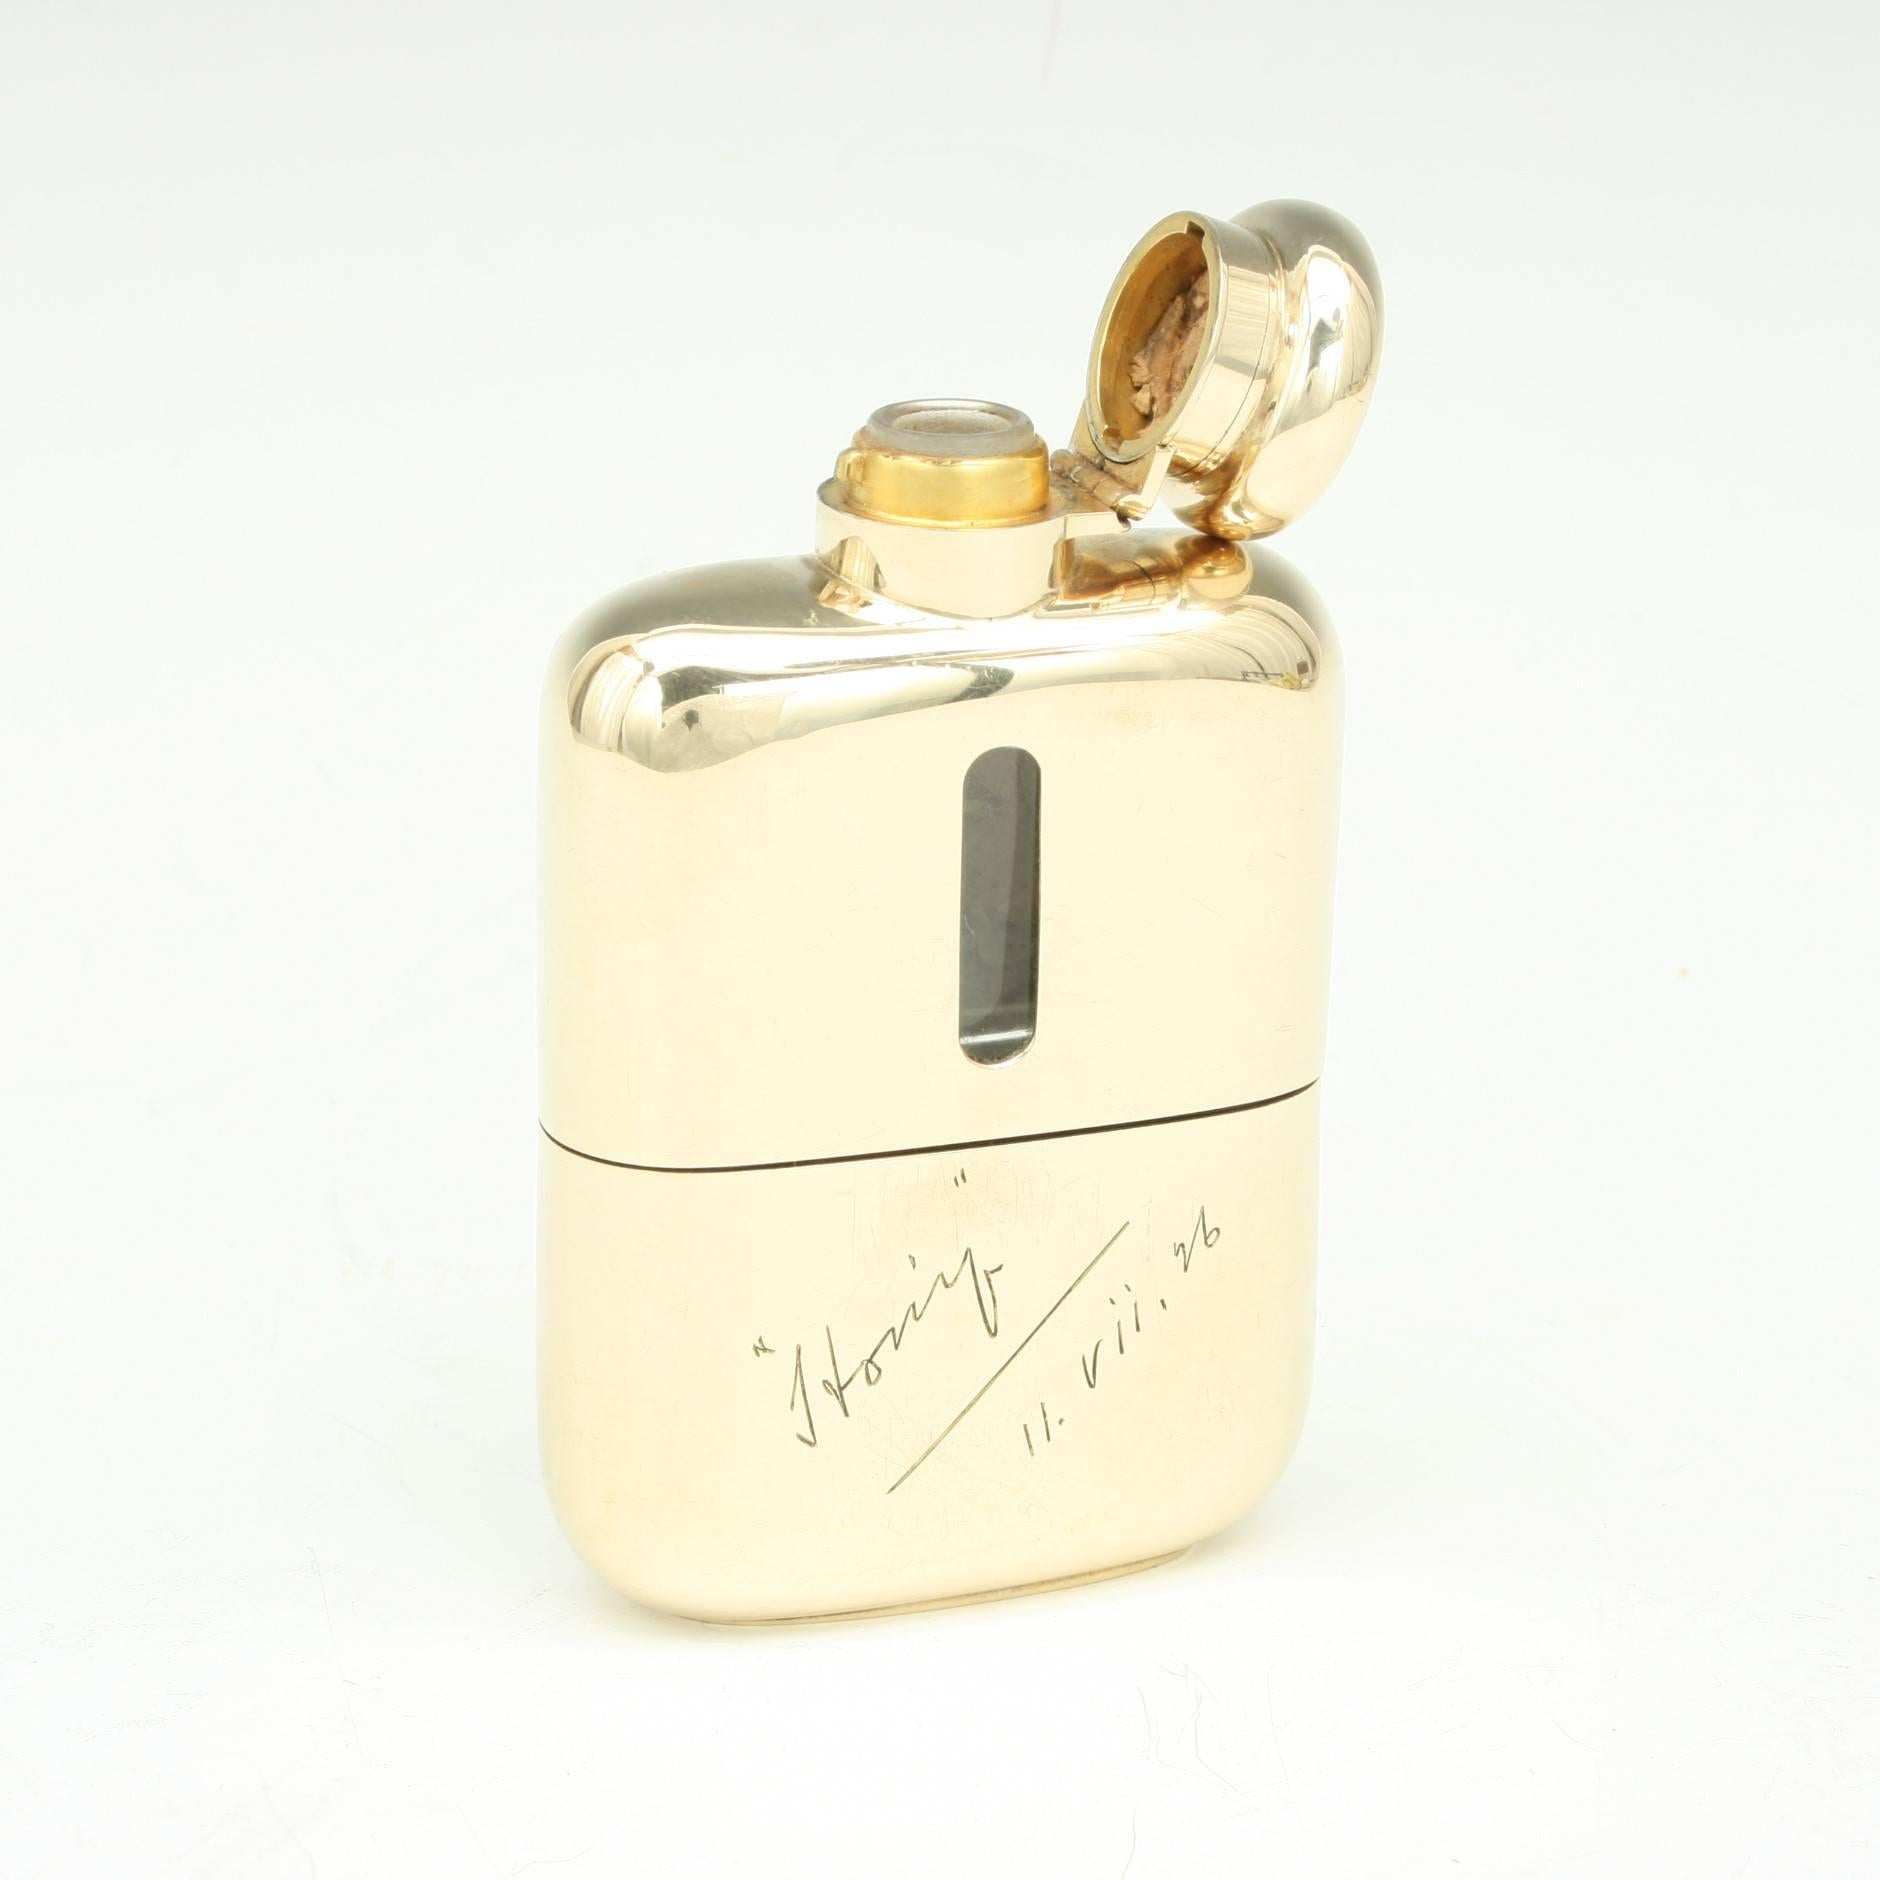 A high quality 9-carat gold and glass hip flask. The top half covered in gold with level viewing windows on both sides, the lower section a removable drinking cup. All gold marked "Goldsmiths & Silversmiths Co. Ltd." and, 9 for 9ct